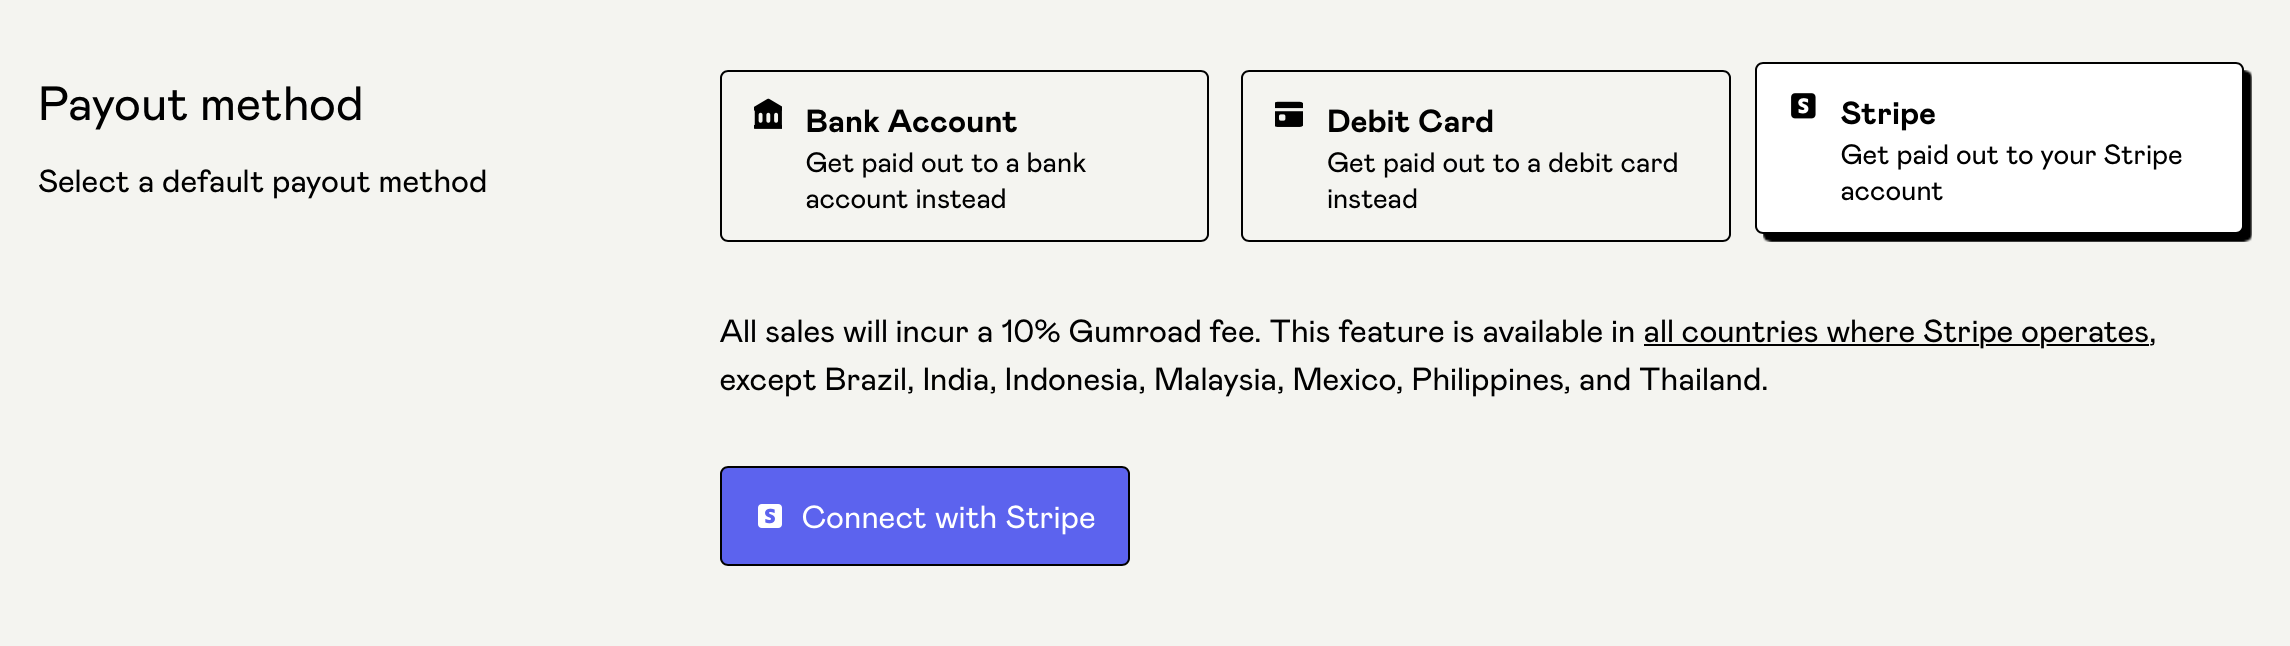 Payouts with Stripe